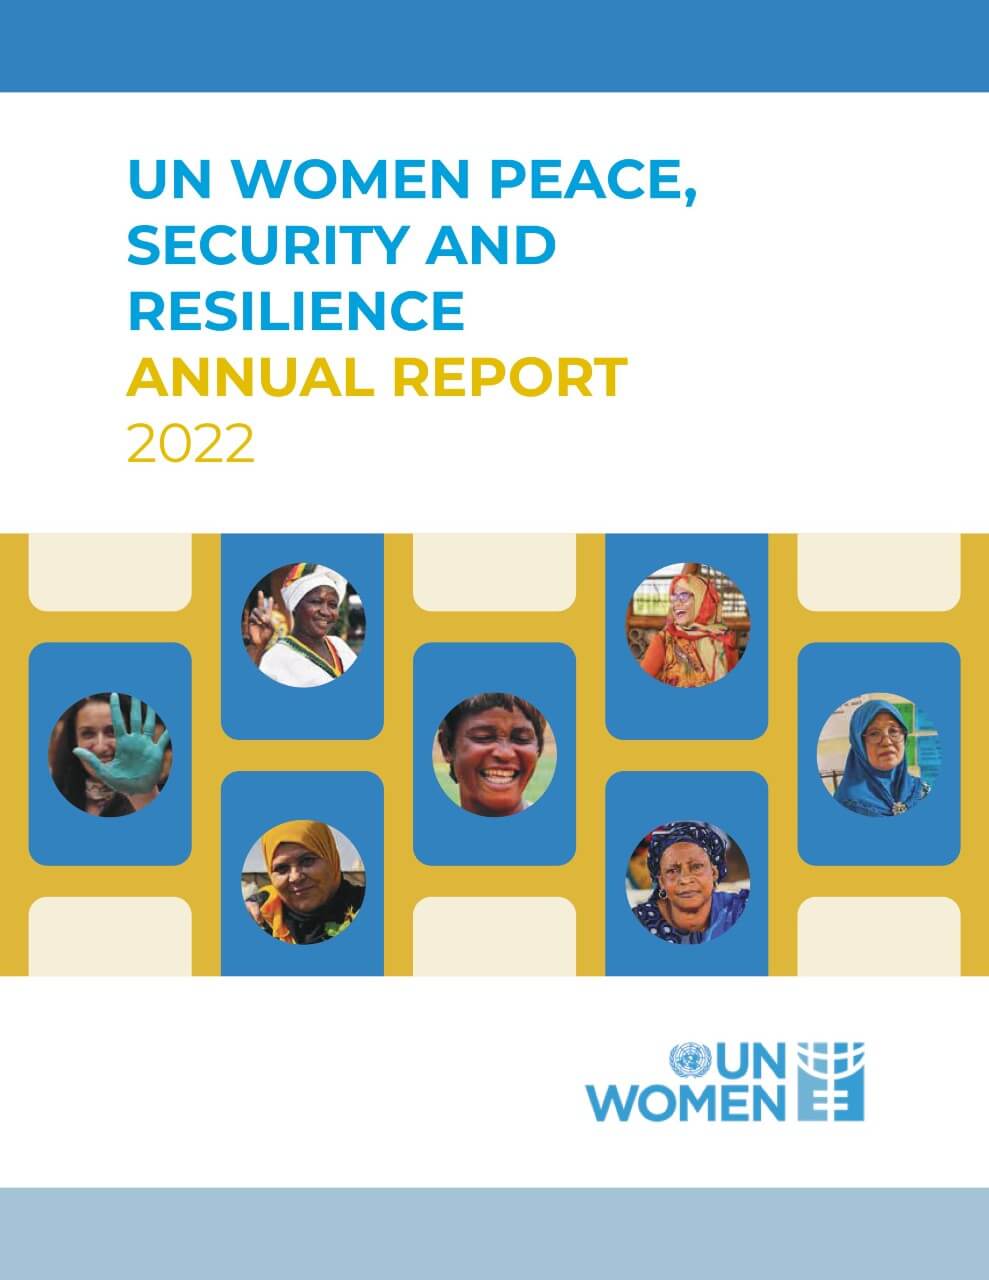 Women, peace, security, and resilience annual report 2022